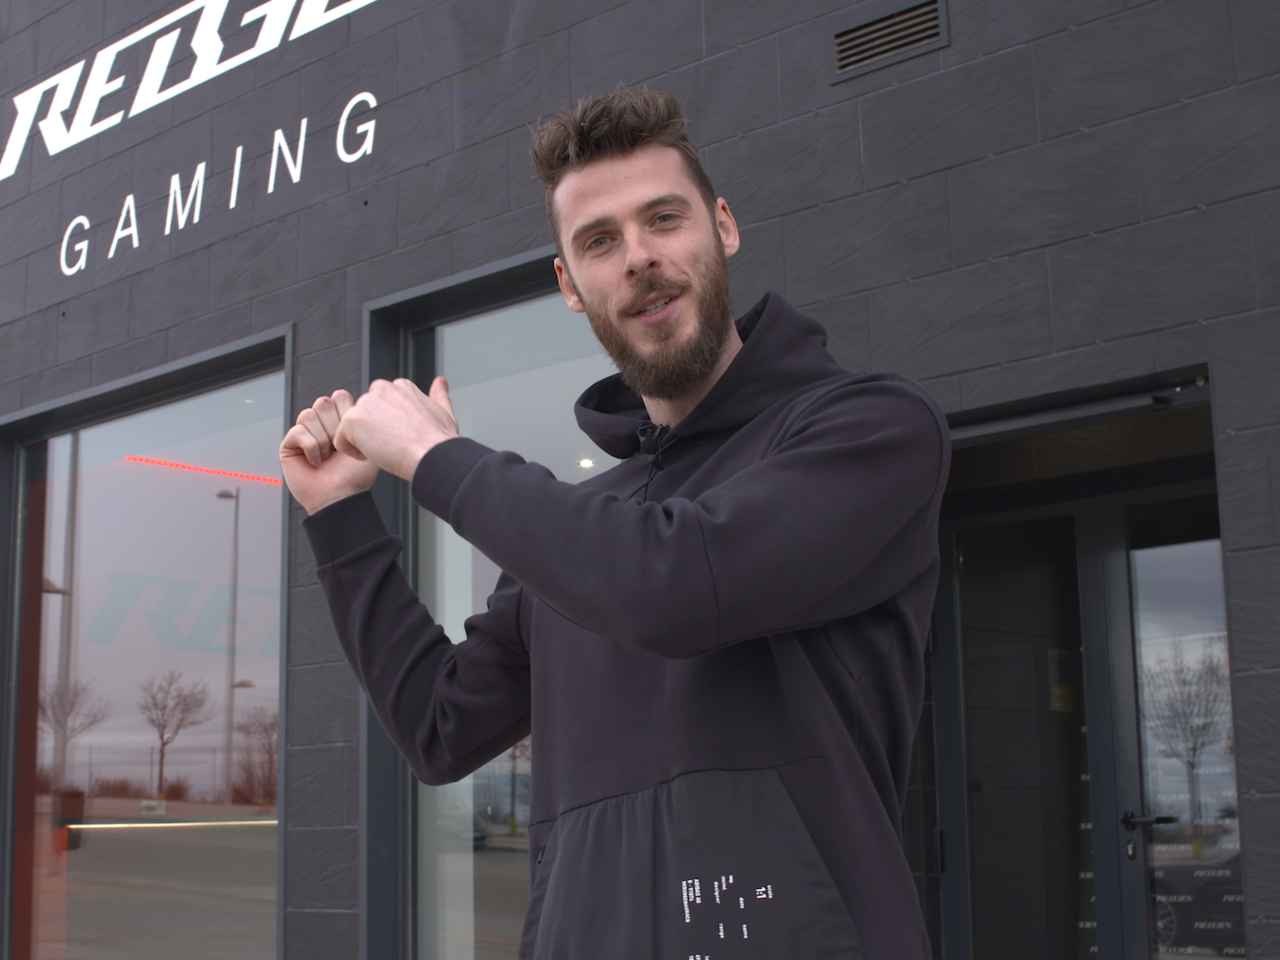 De Gea Rebels Gaming feature in Inside United May 2022 | Manchester United